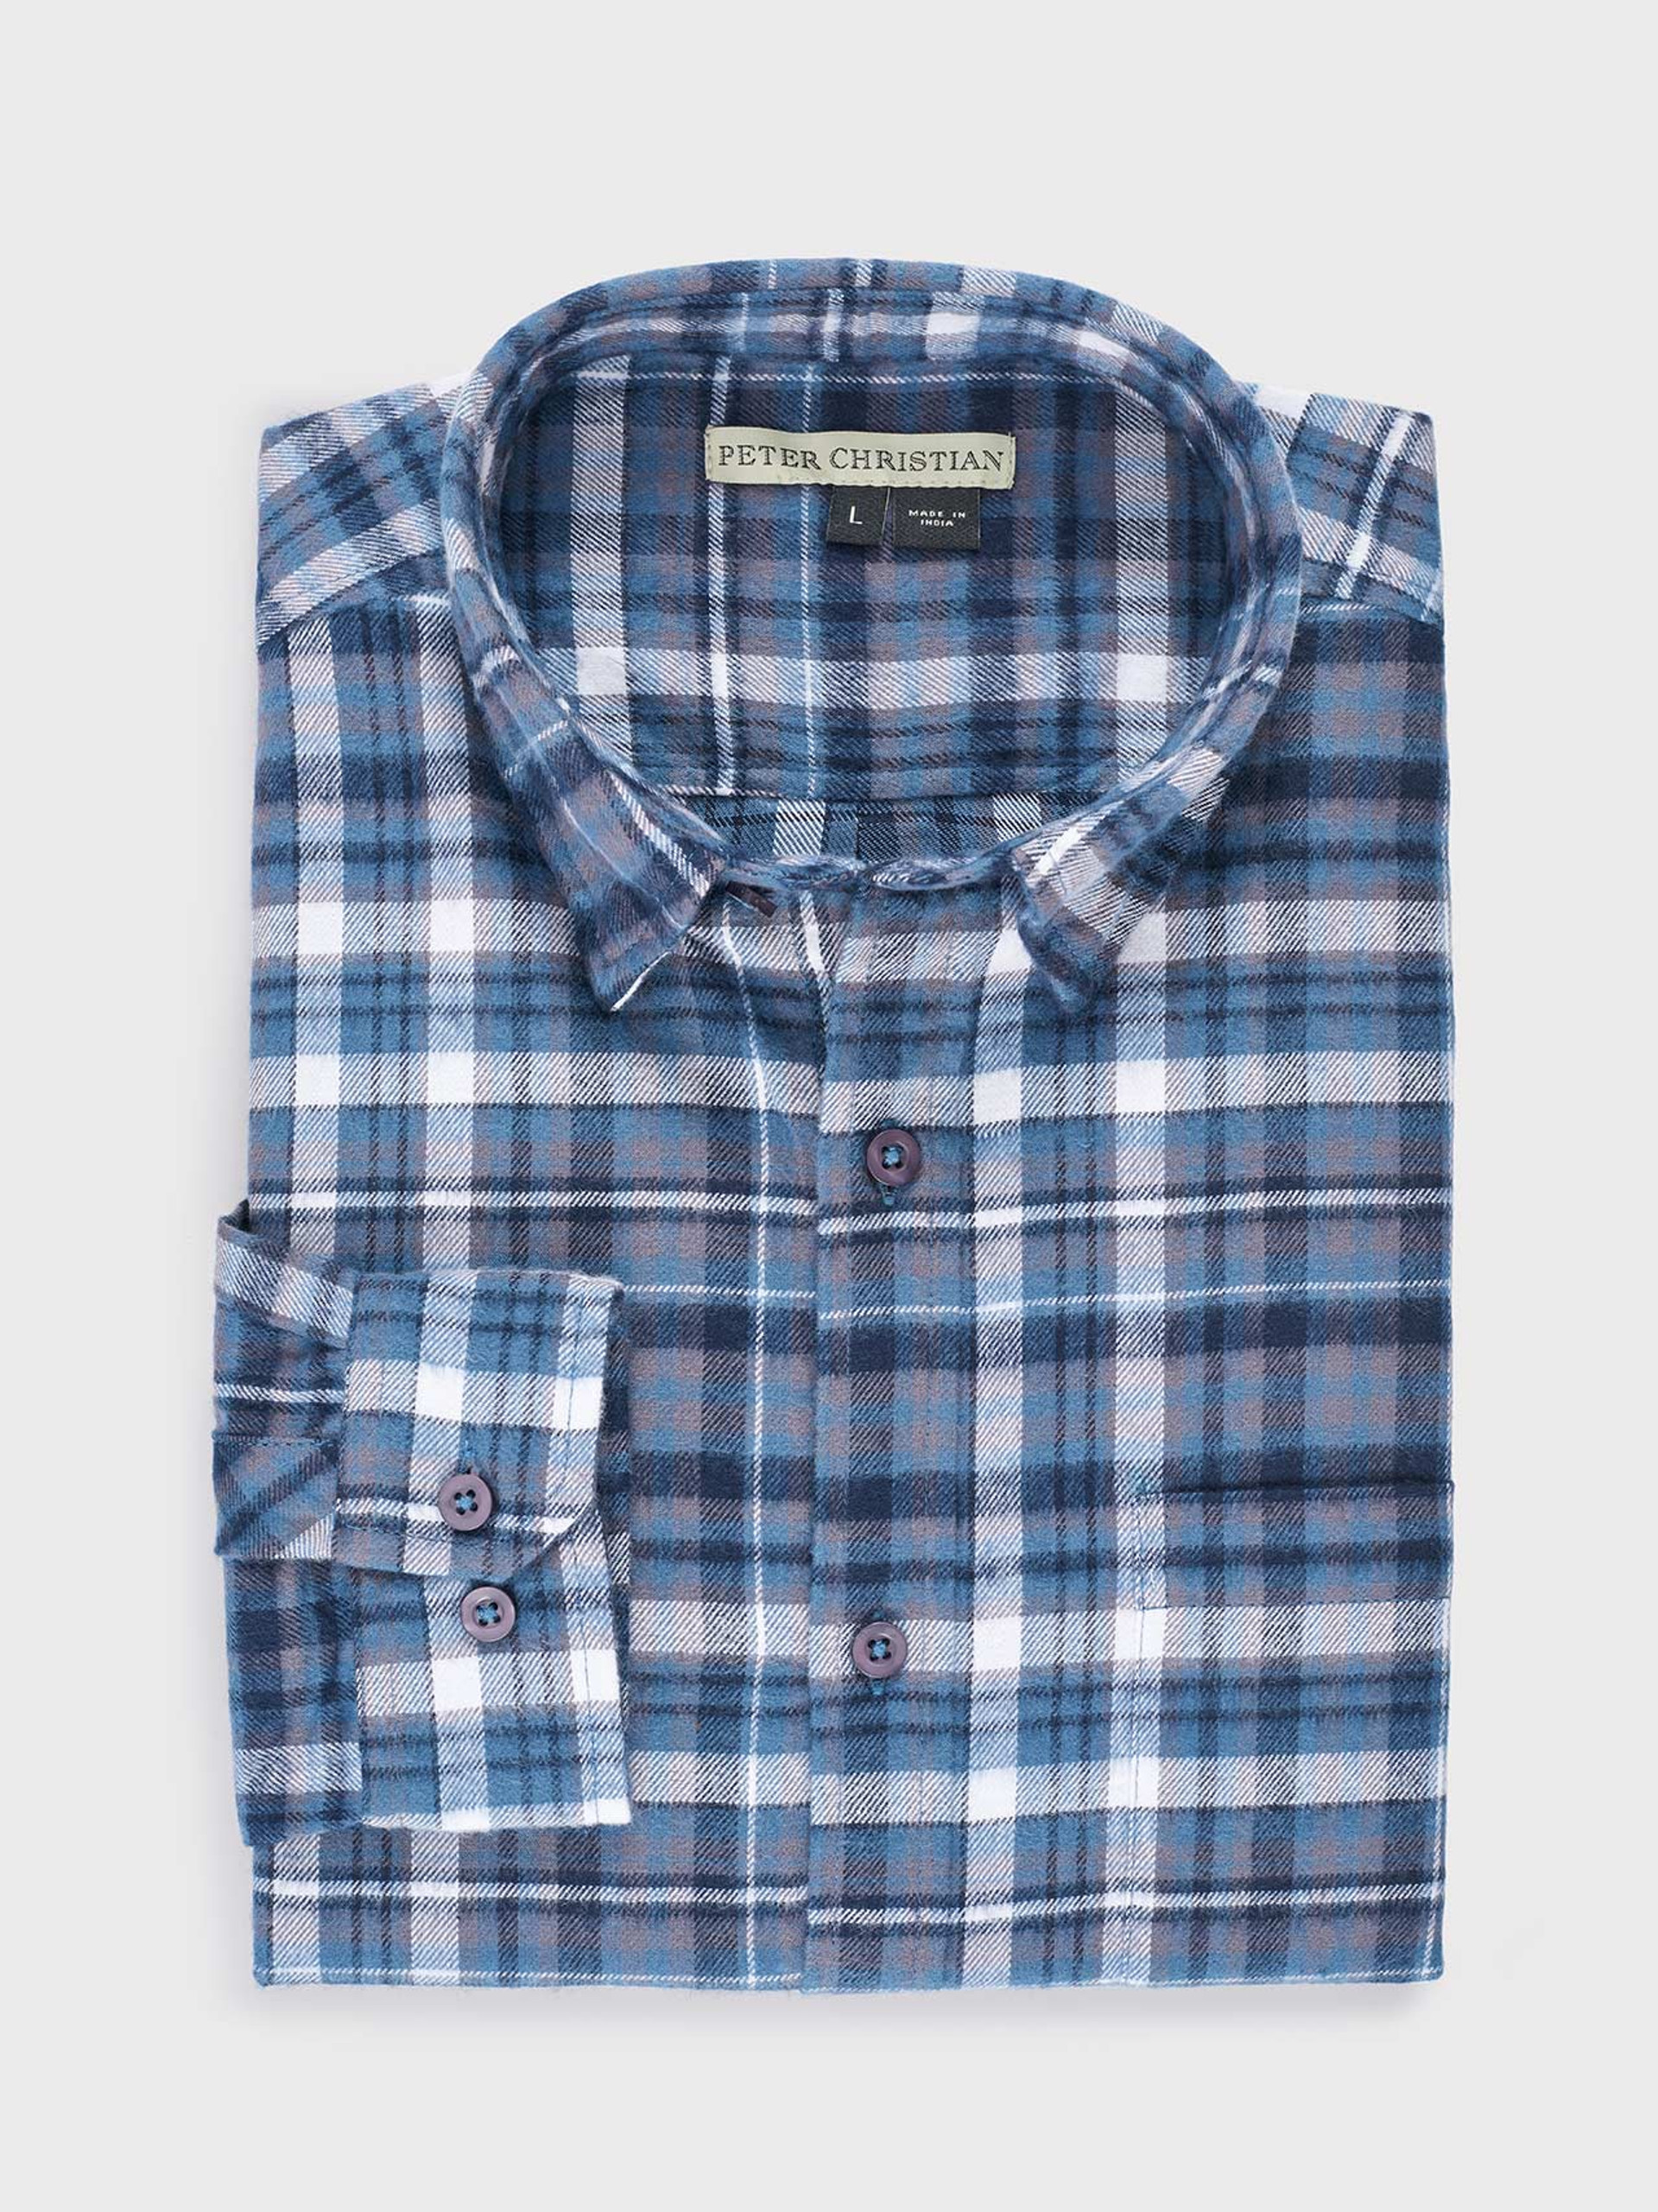 Men's Shirts - Quality Styles & Designs | Peter Christian